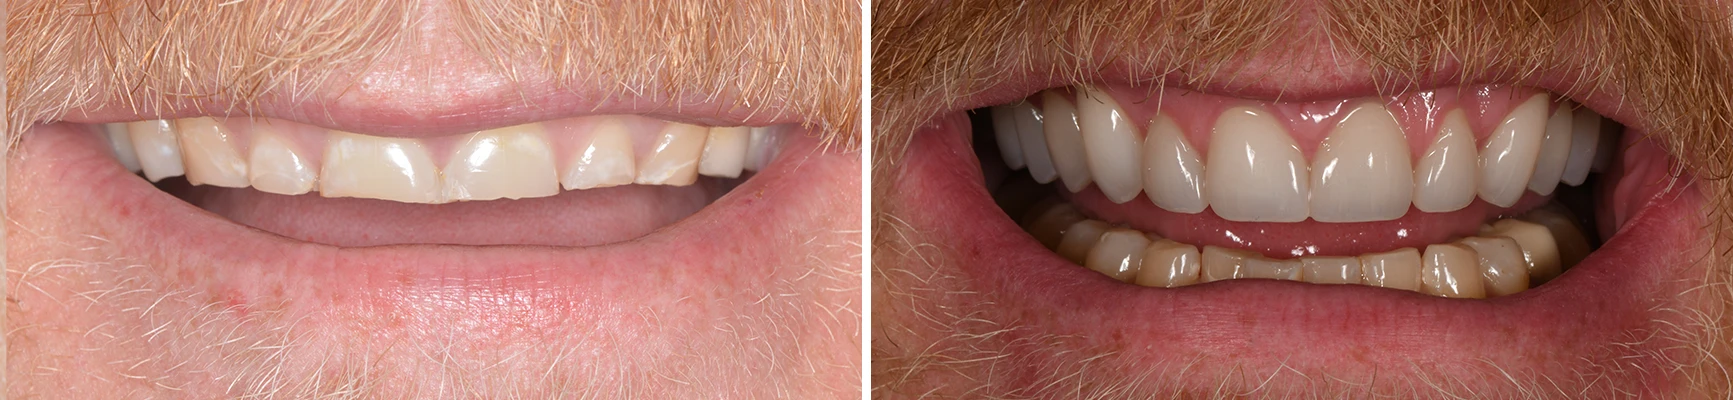 Dentist Waukesha WI Tooth Before and After Crowns